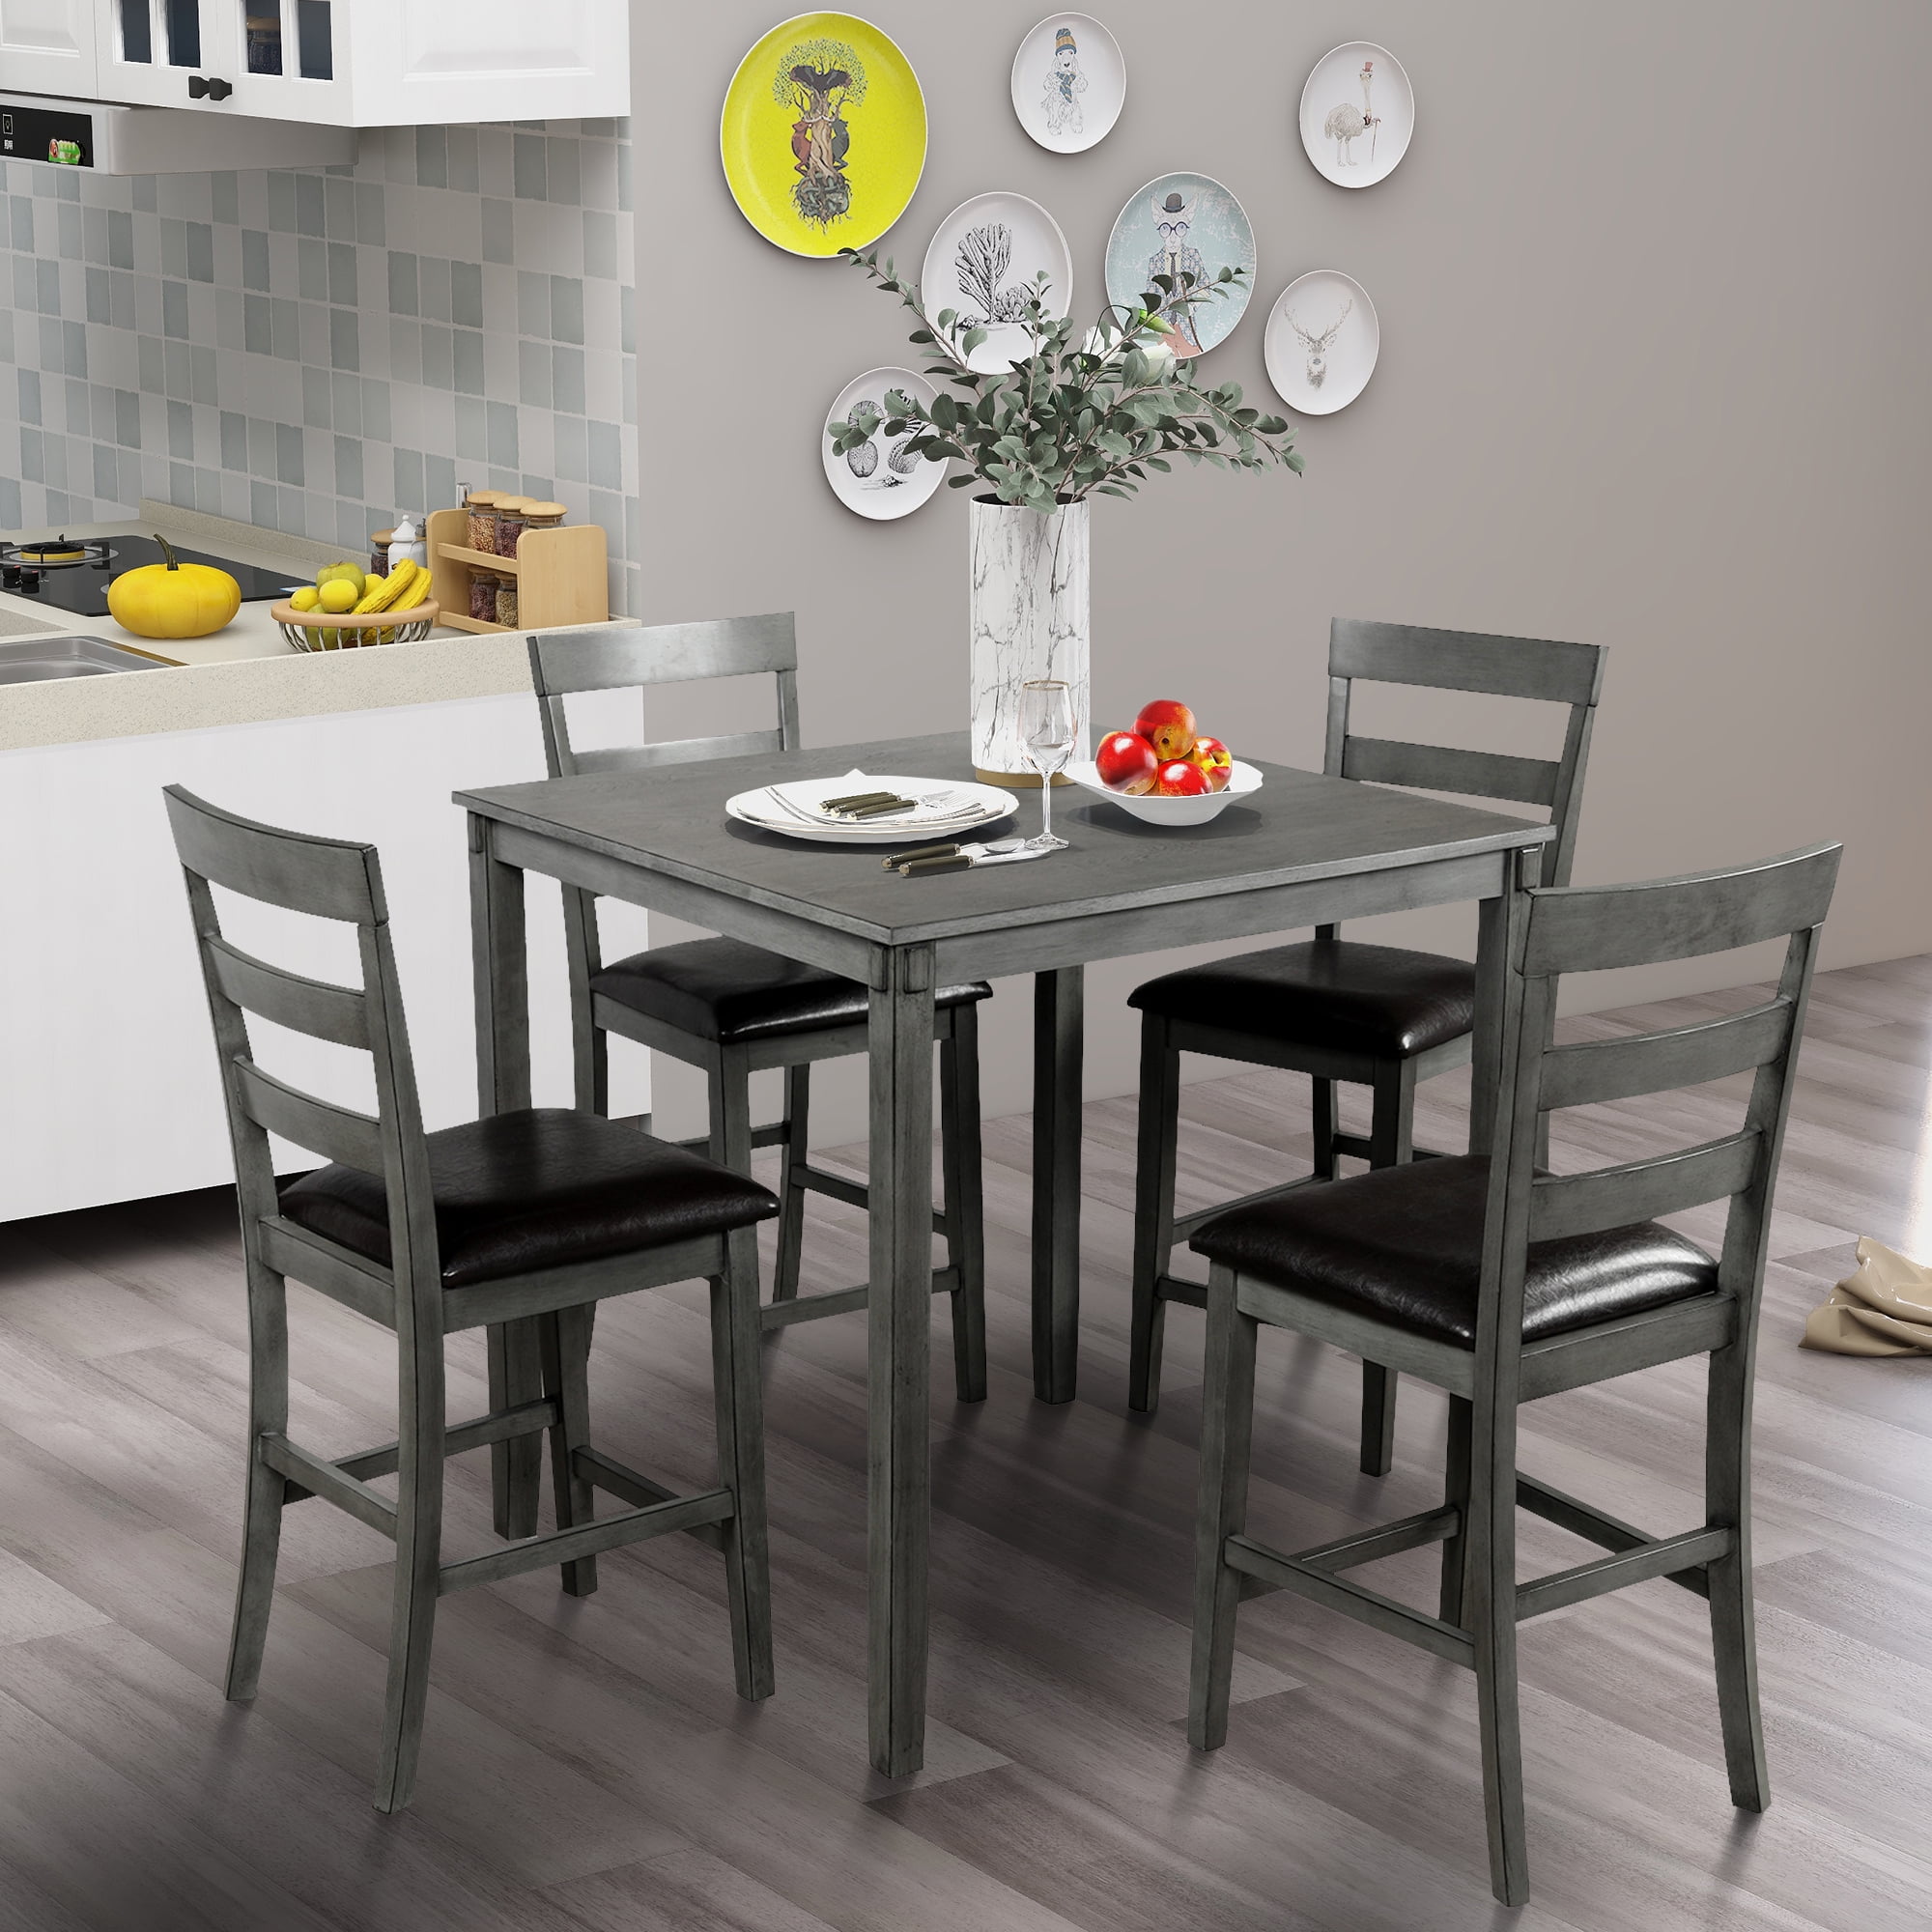 Dining Table Set with Table and 4 PU Leather Cushioned Chairs, 5 Piece ...